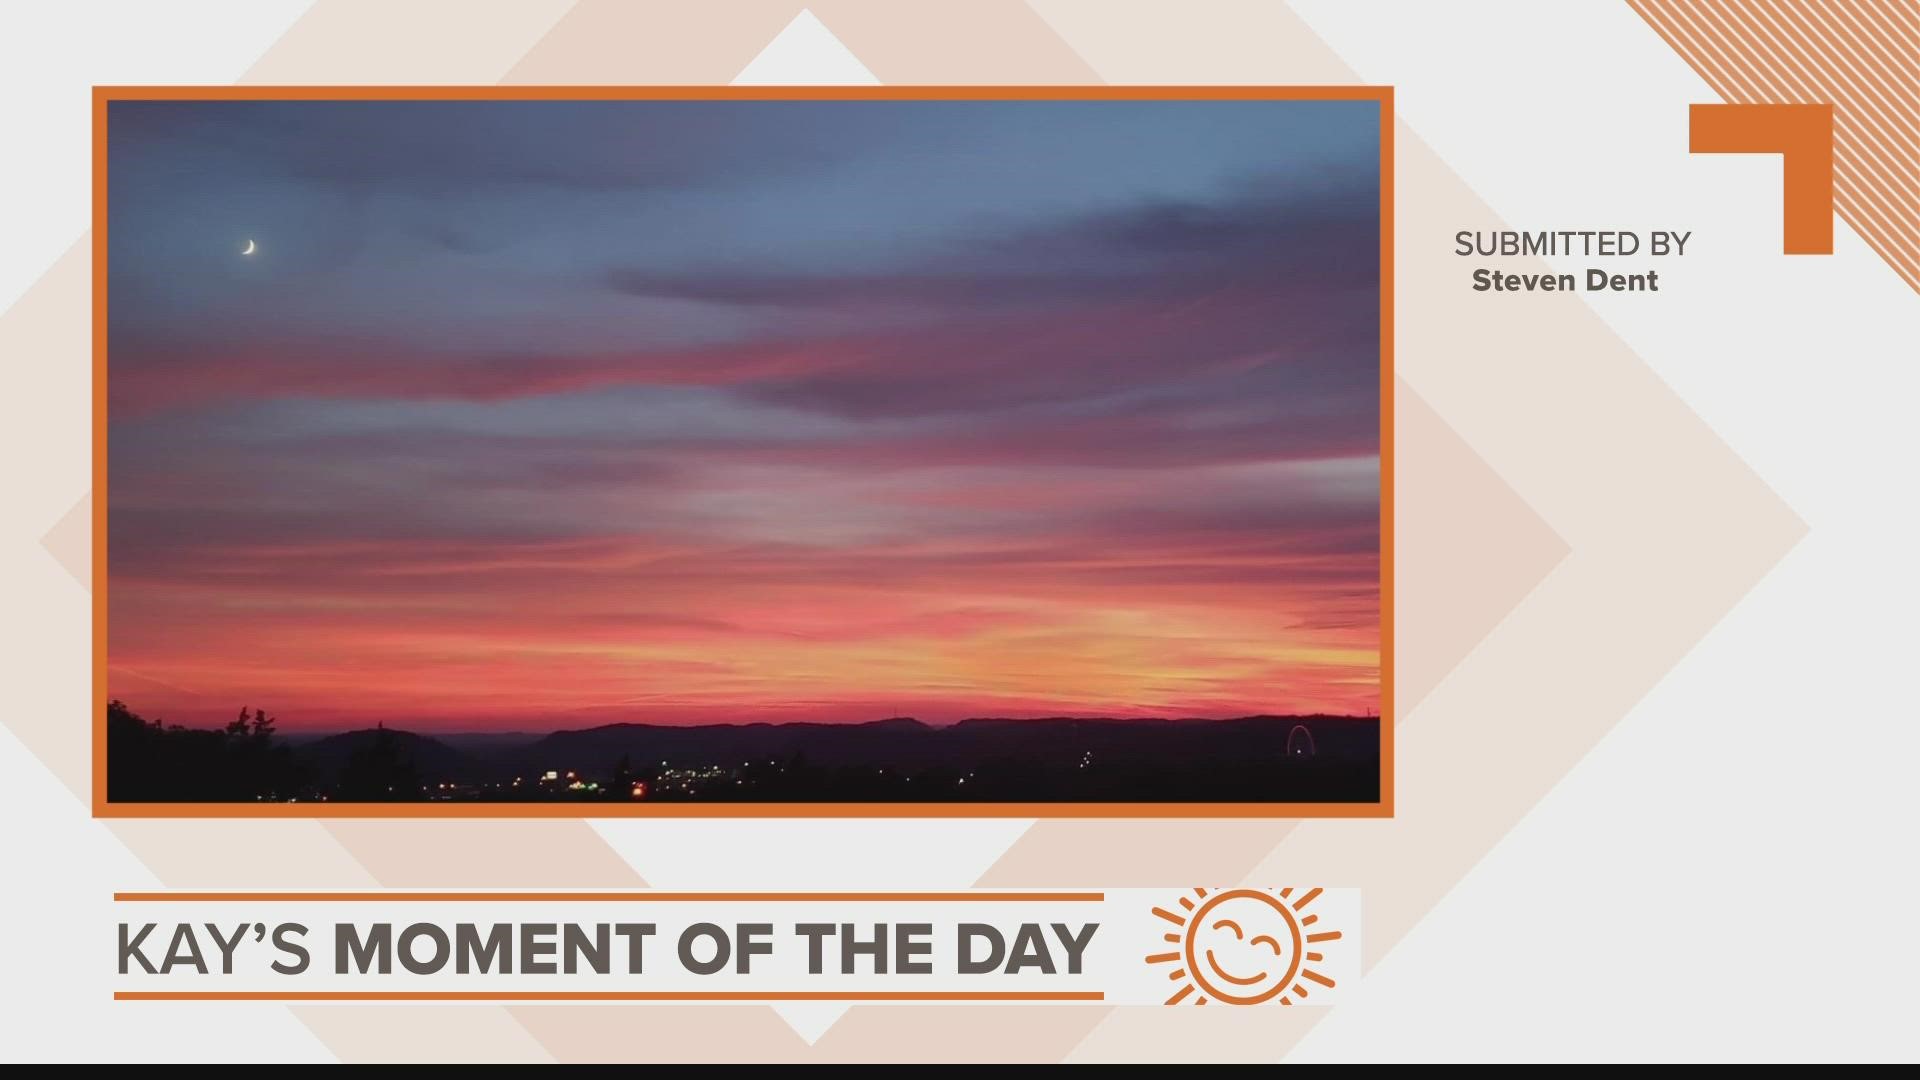 Kay's Moment of the Day for Oct. 11